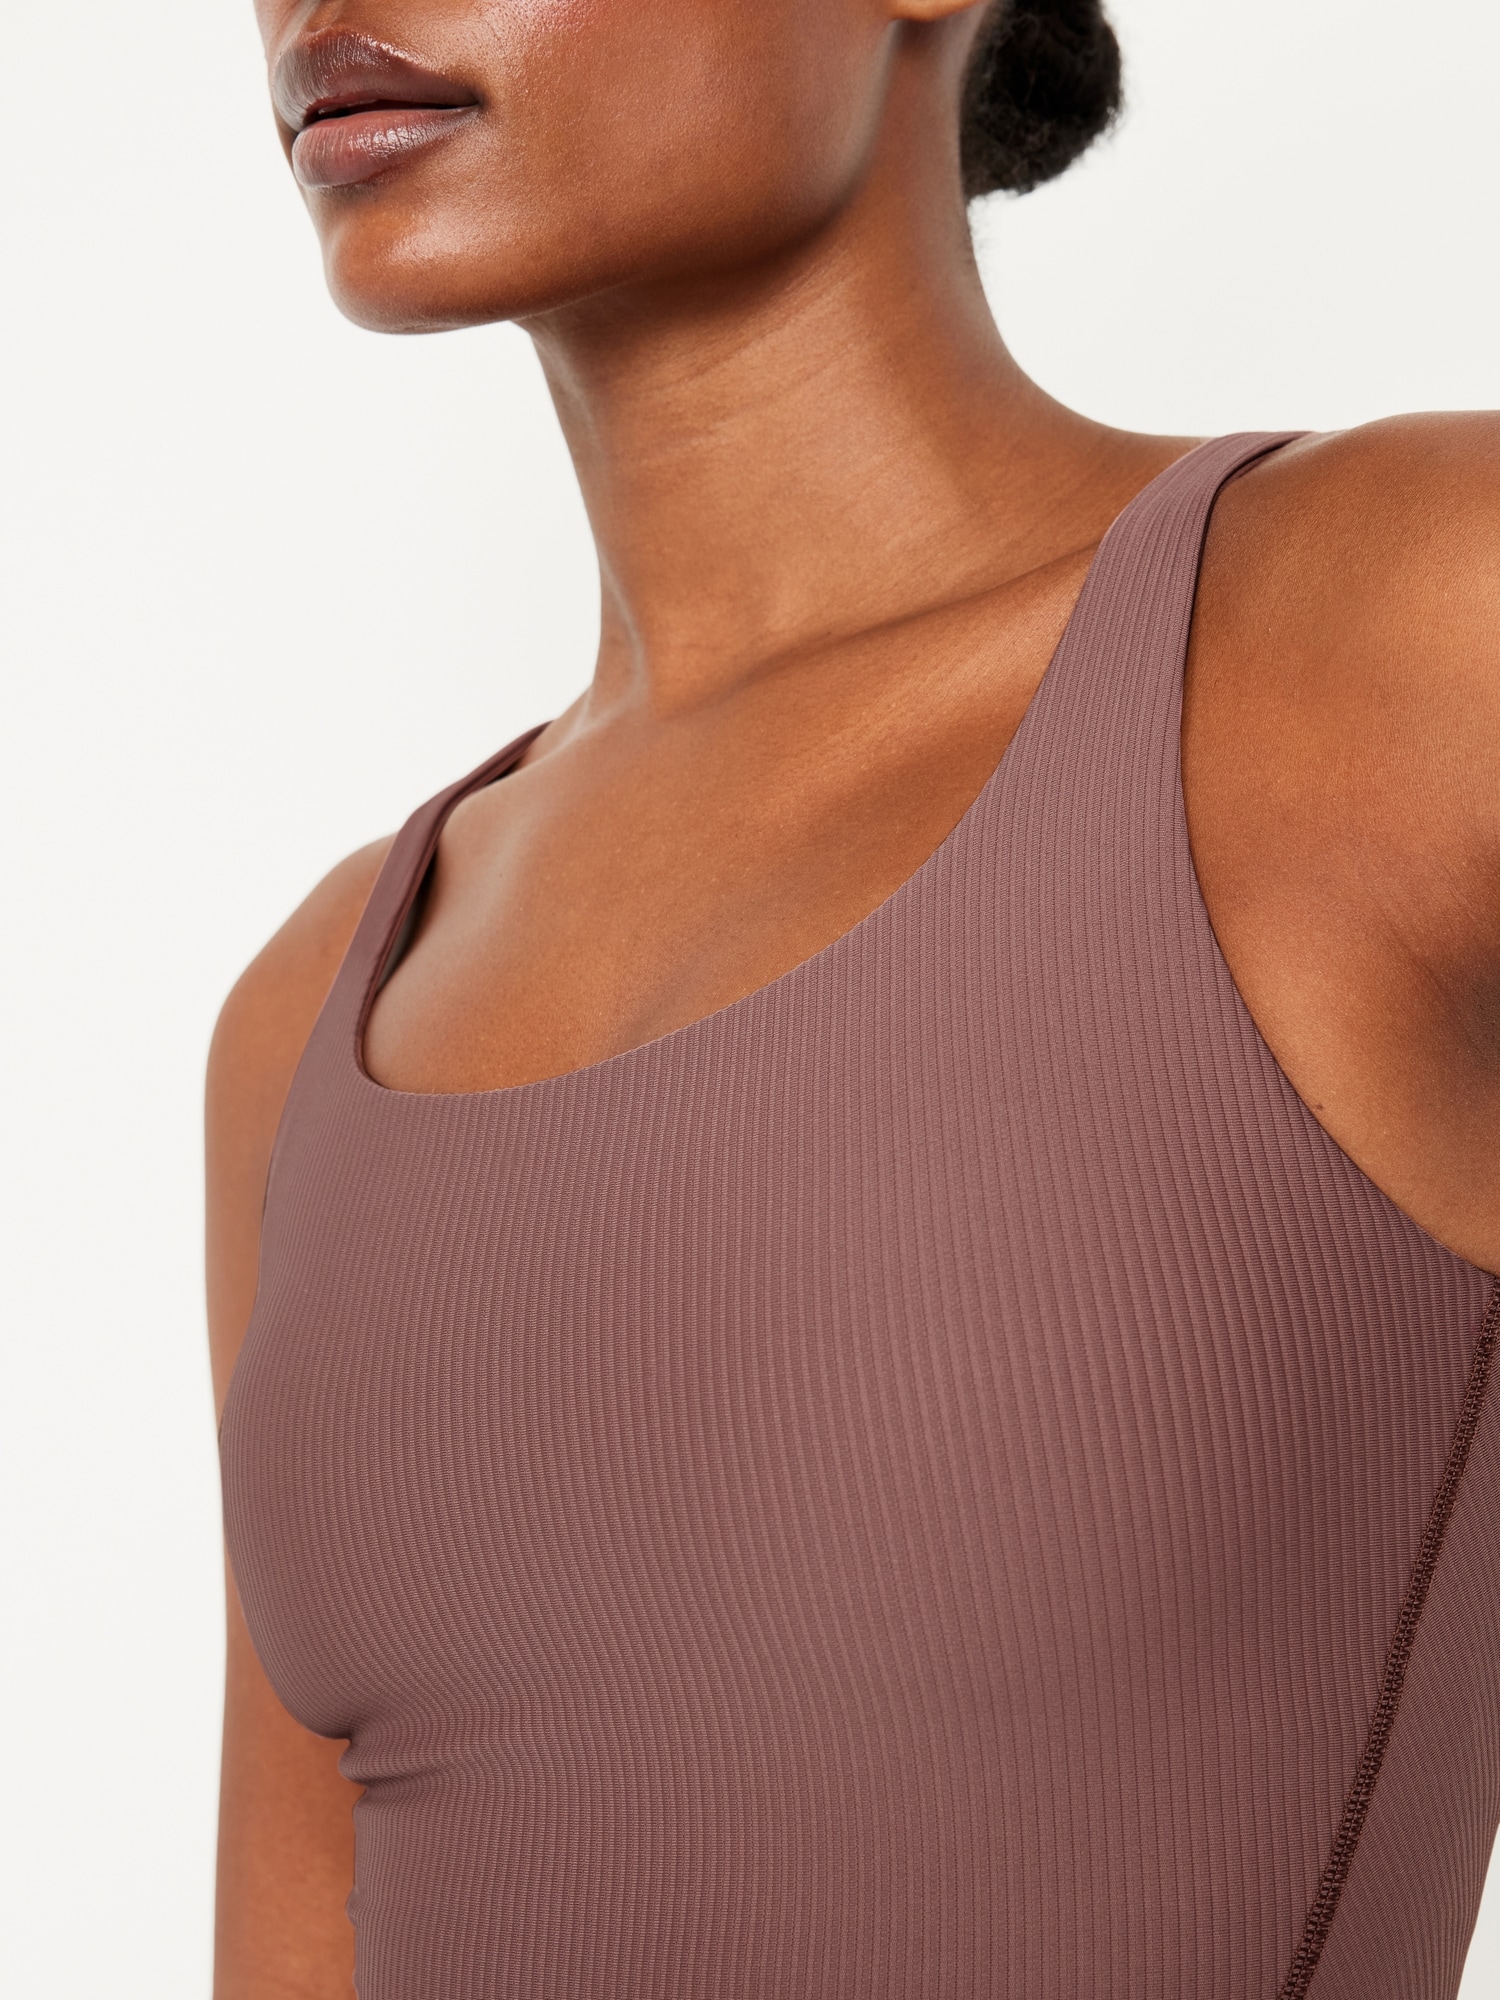 Old Navy Light Support PowerSoft Ribbed Longline Sports Bra for Women